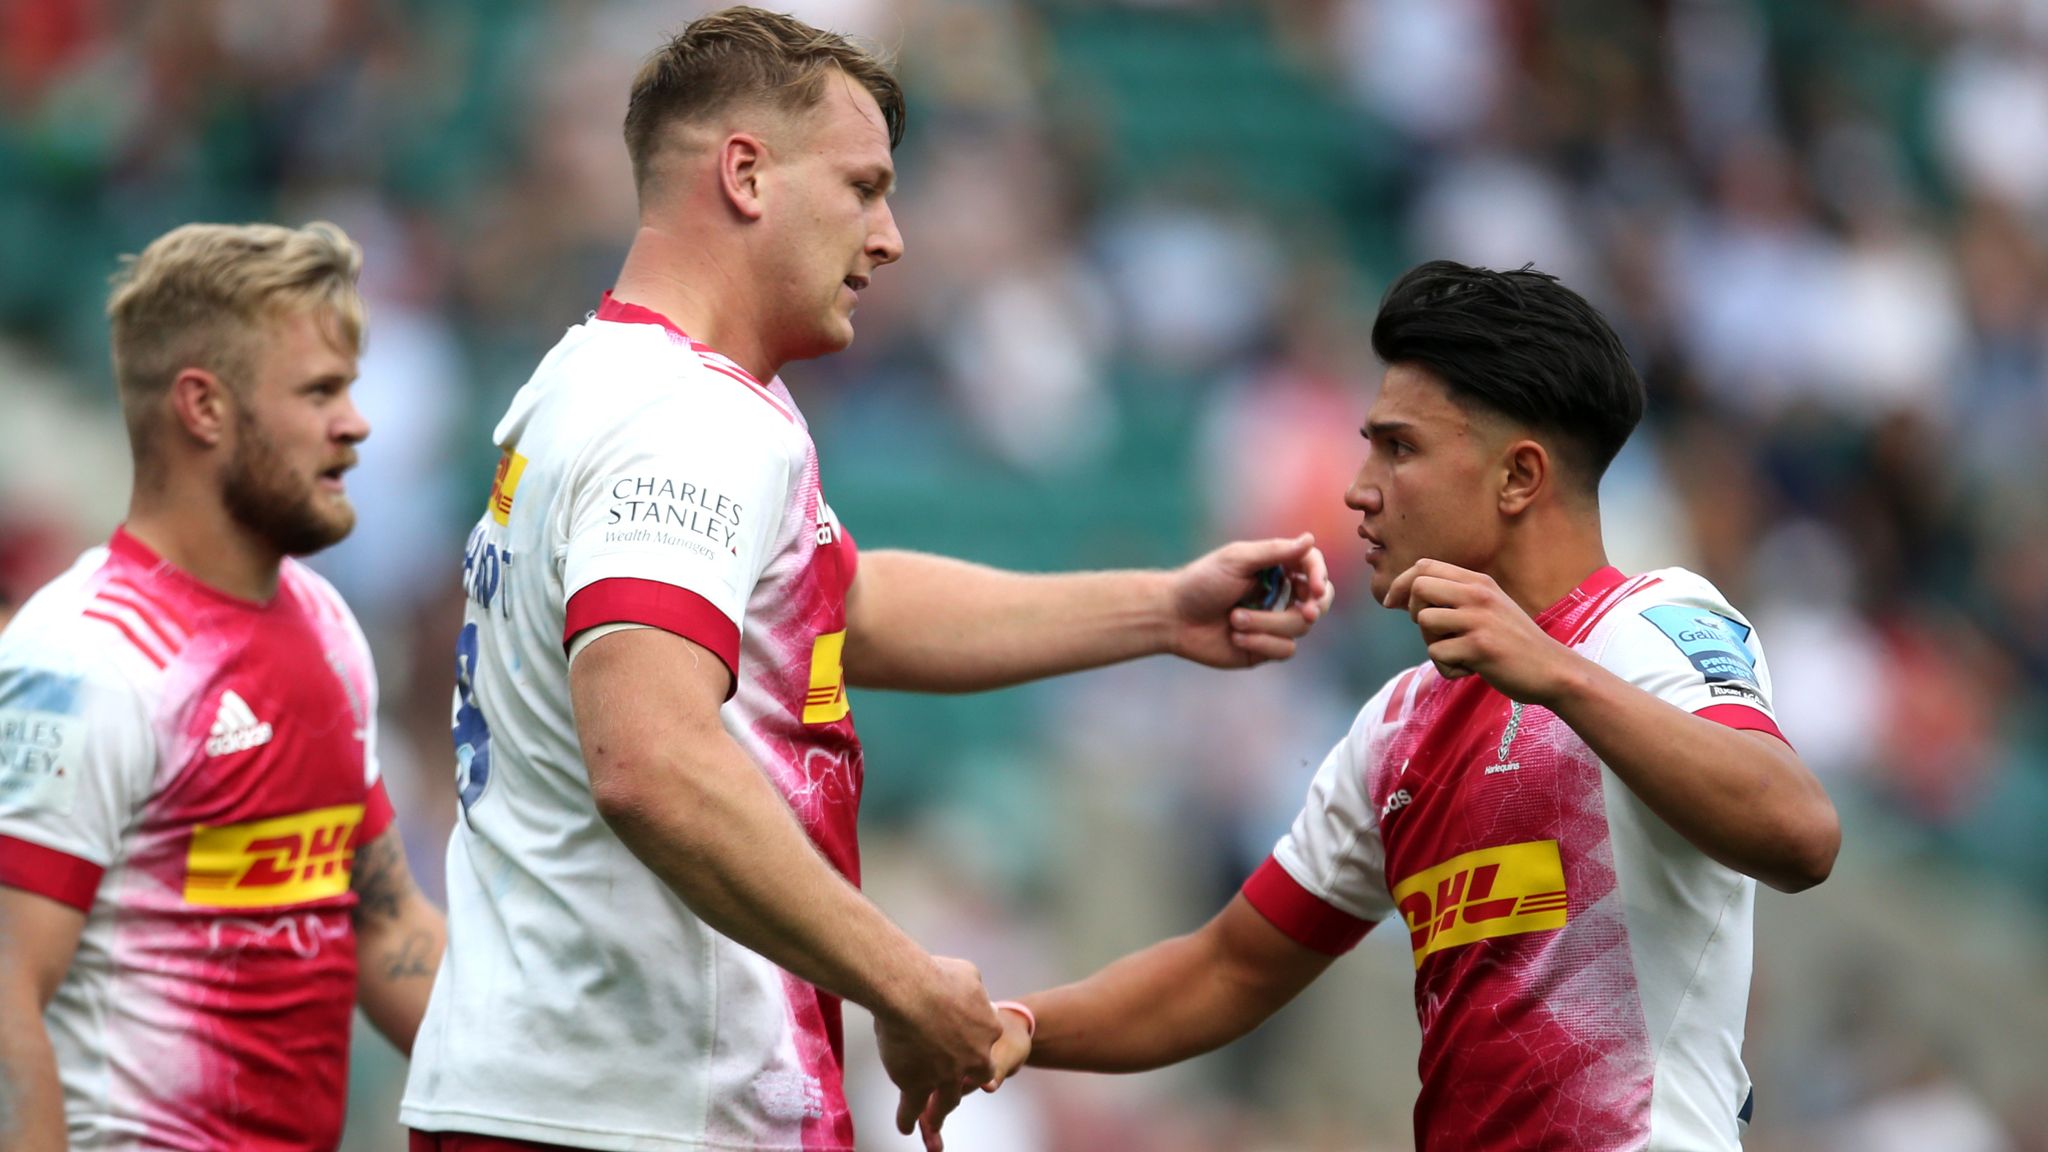 England and Harlequins team-mates Marcus Smith and Alex Dombrandt seeing hard work pay off Rugby Union News Sky Sports